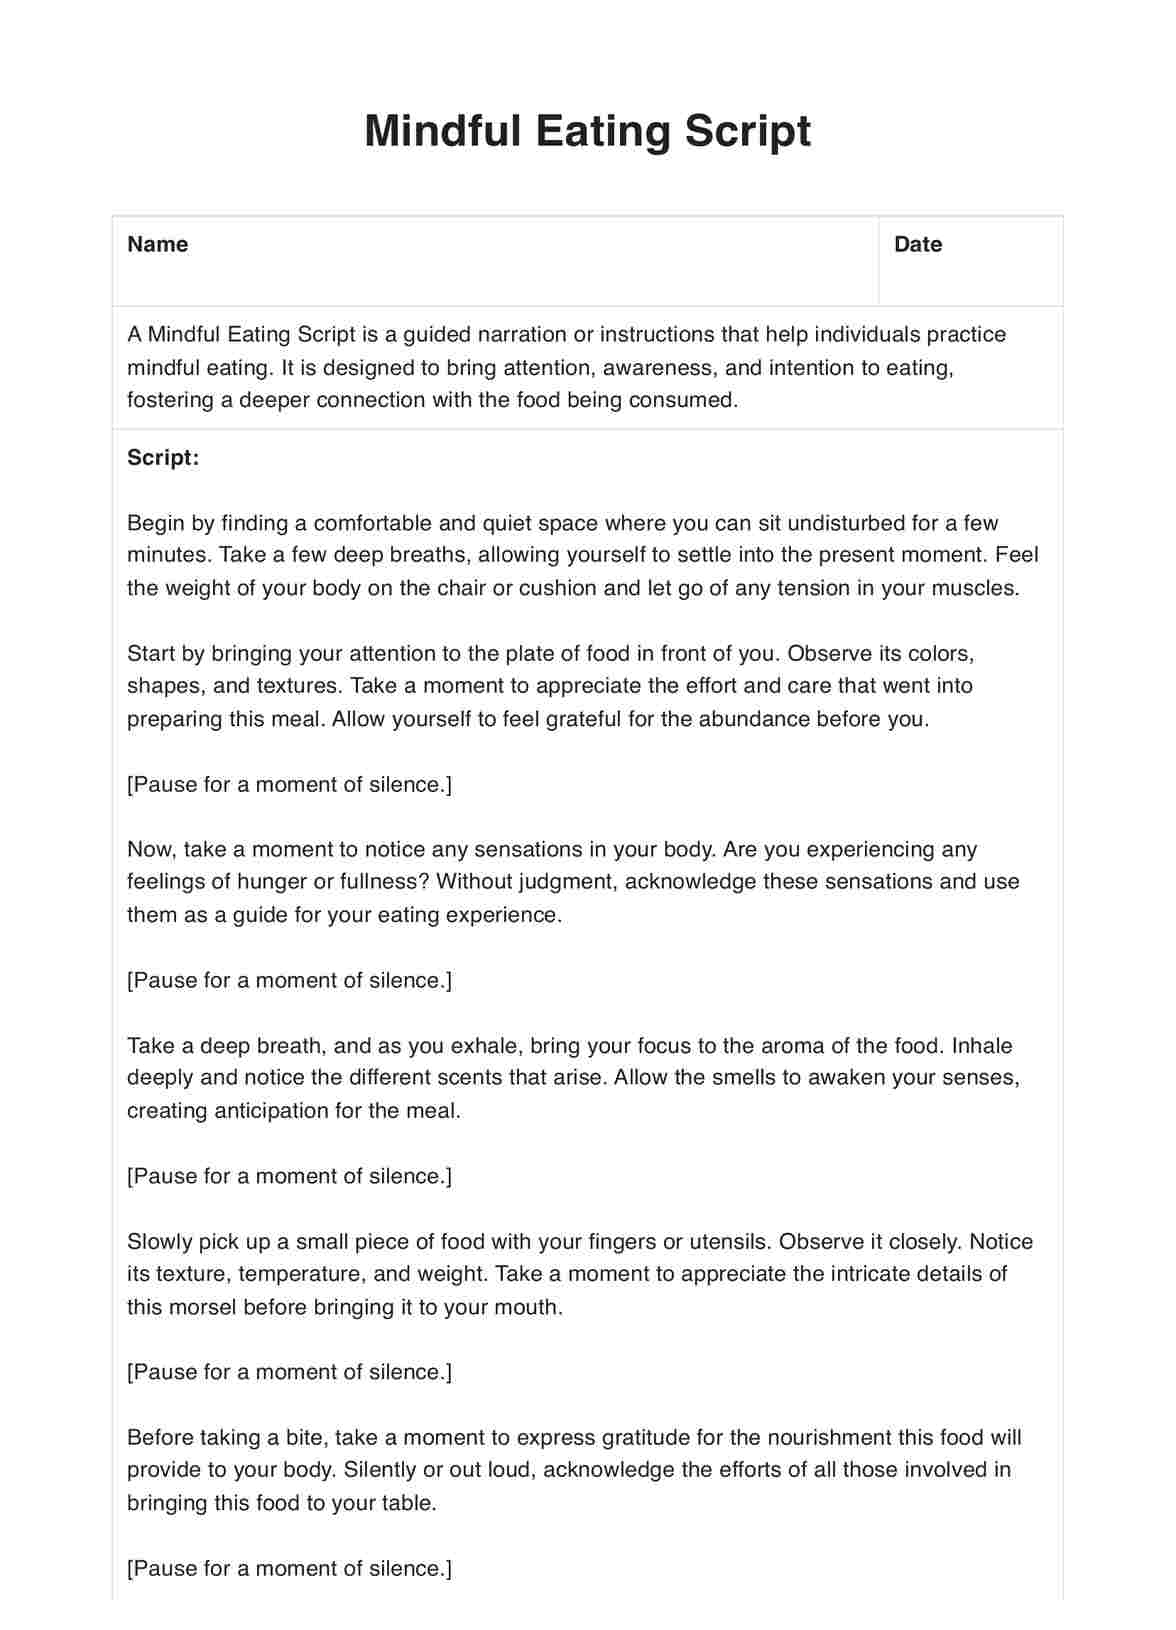 Mindful Eating Script PDF Example